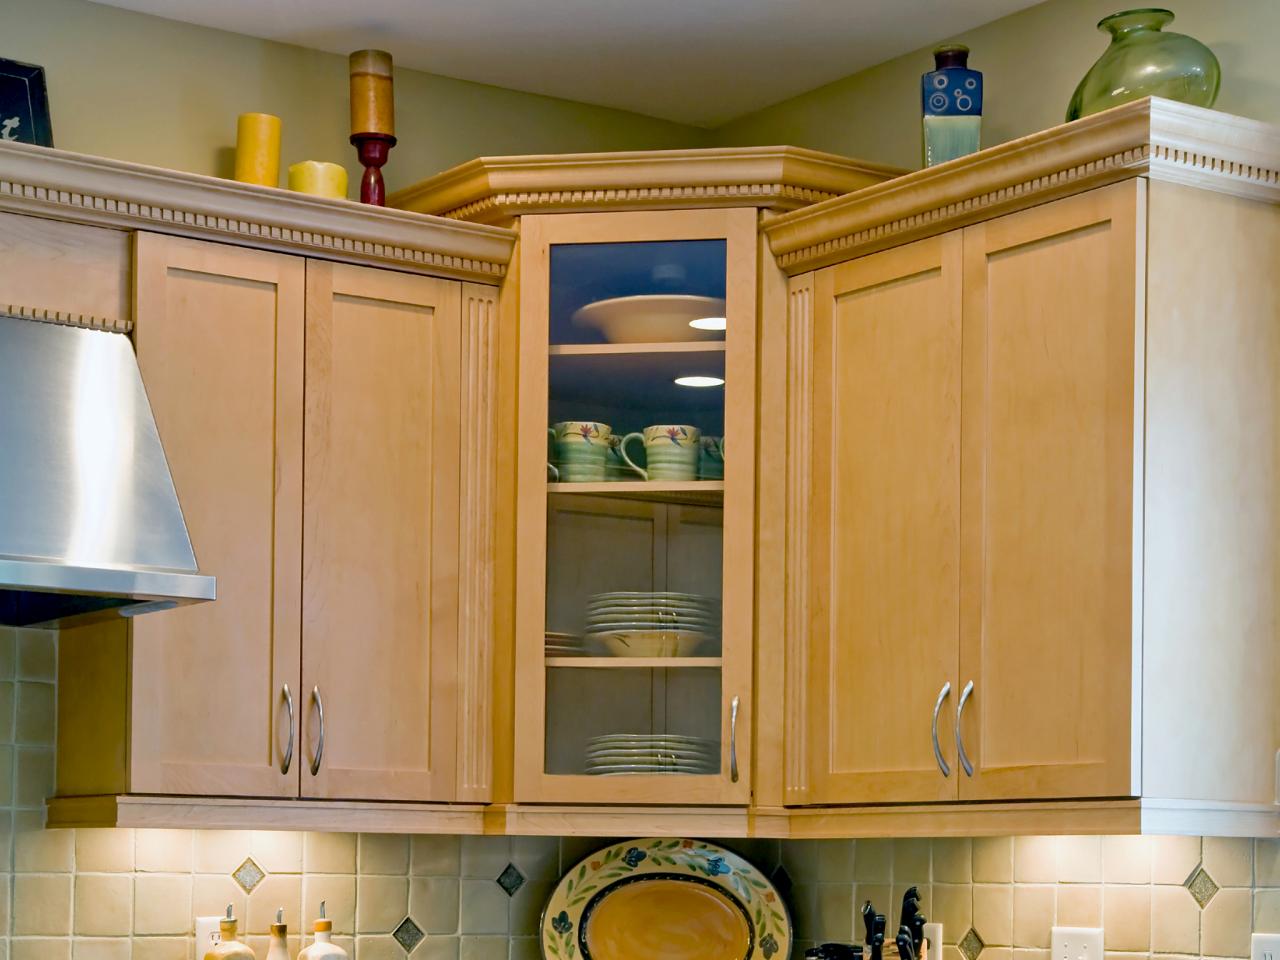 Corner Kitchen Cabinets Pictures, Options, Tips & Ideas   HGTV